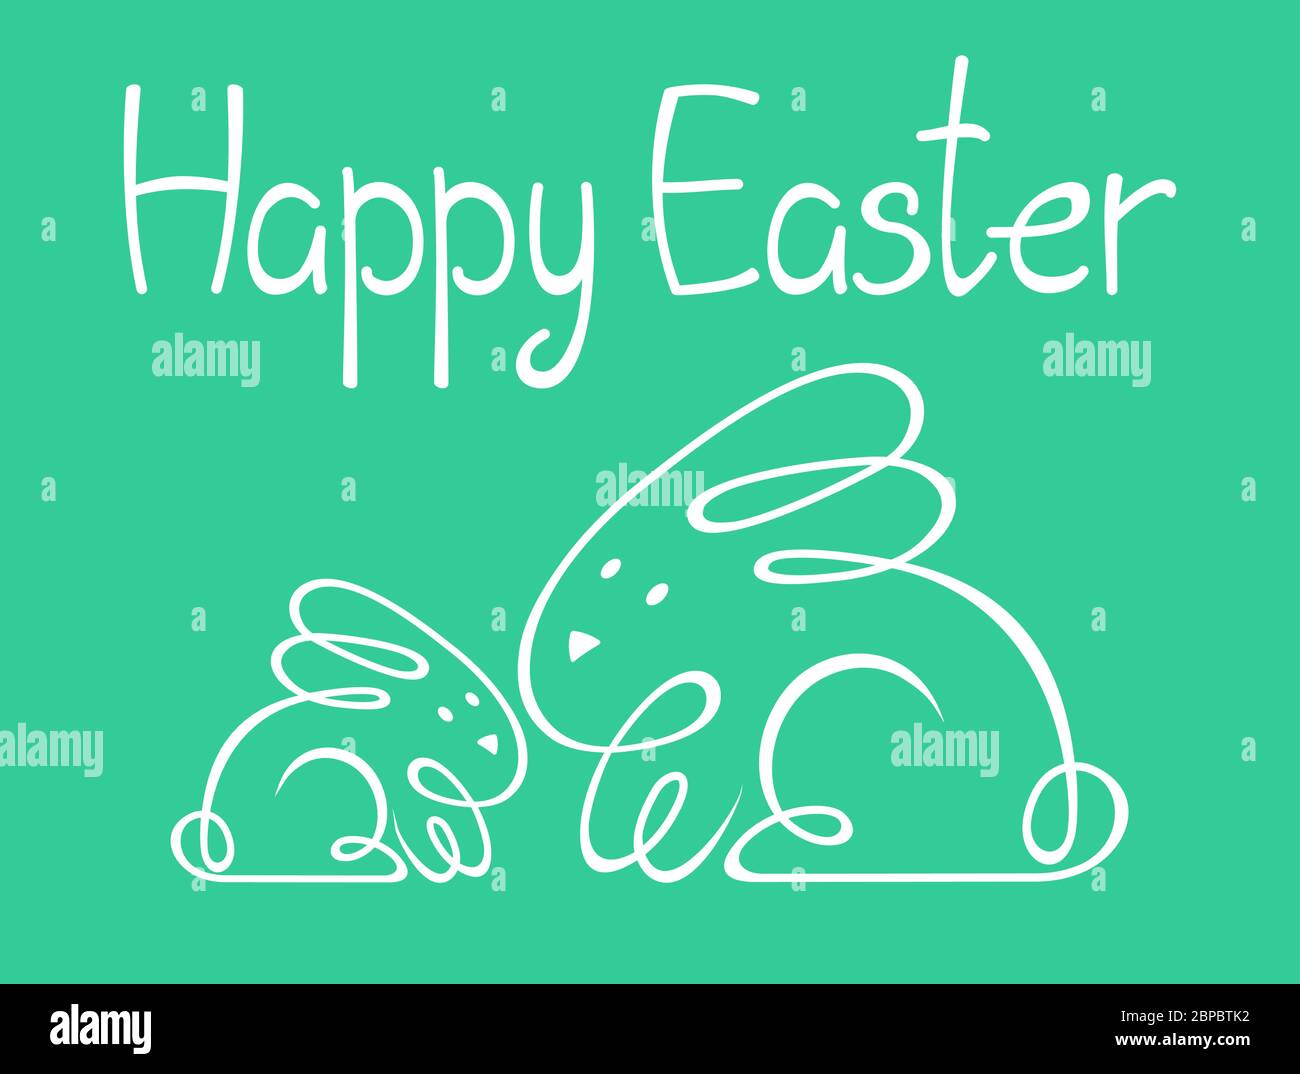 vector image of a bunny and a hare drawn by one line; two cute rabbits; hand drawn. Happy easter, greeting card, easter symbol. Stock Vector